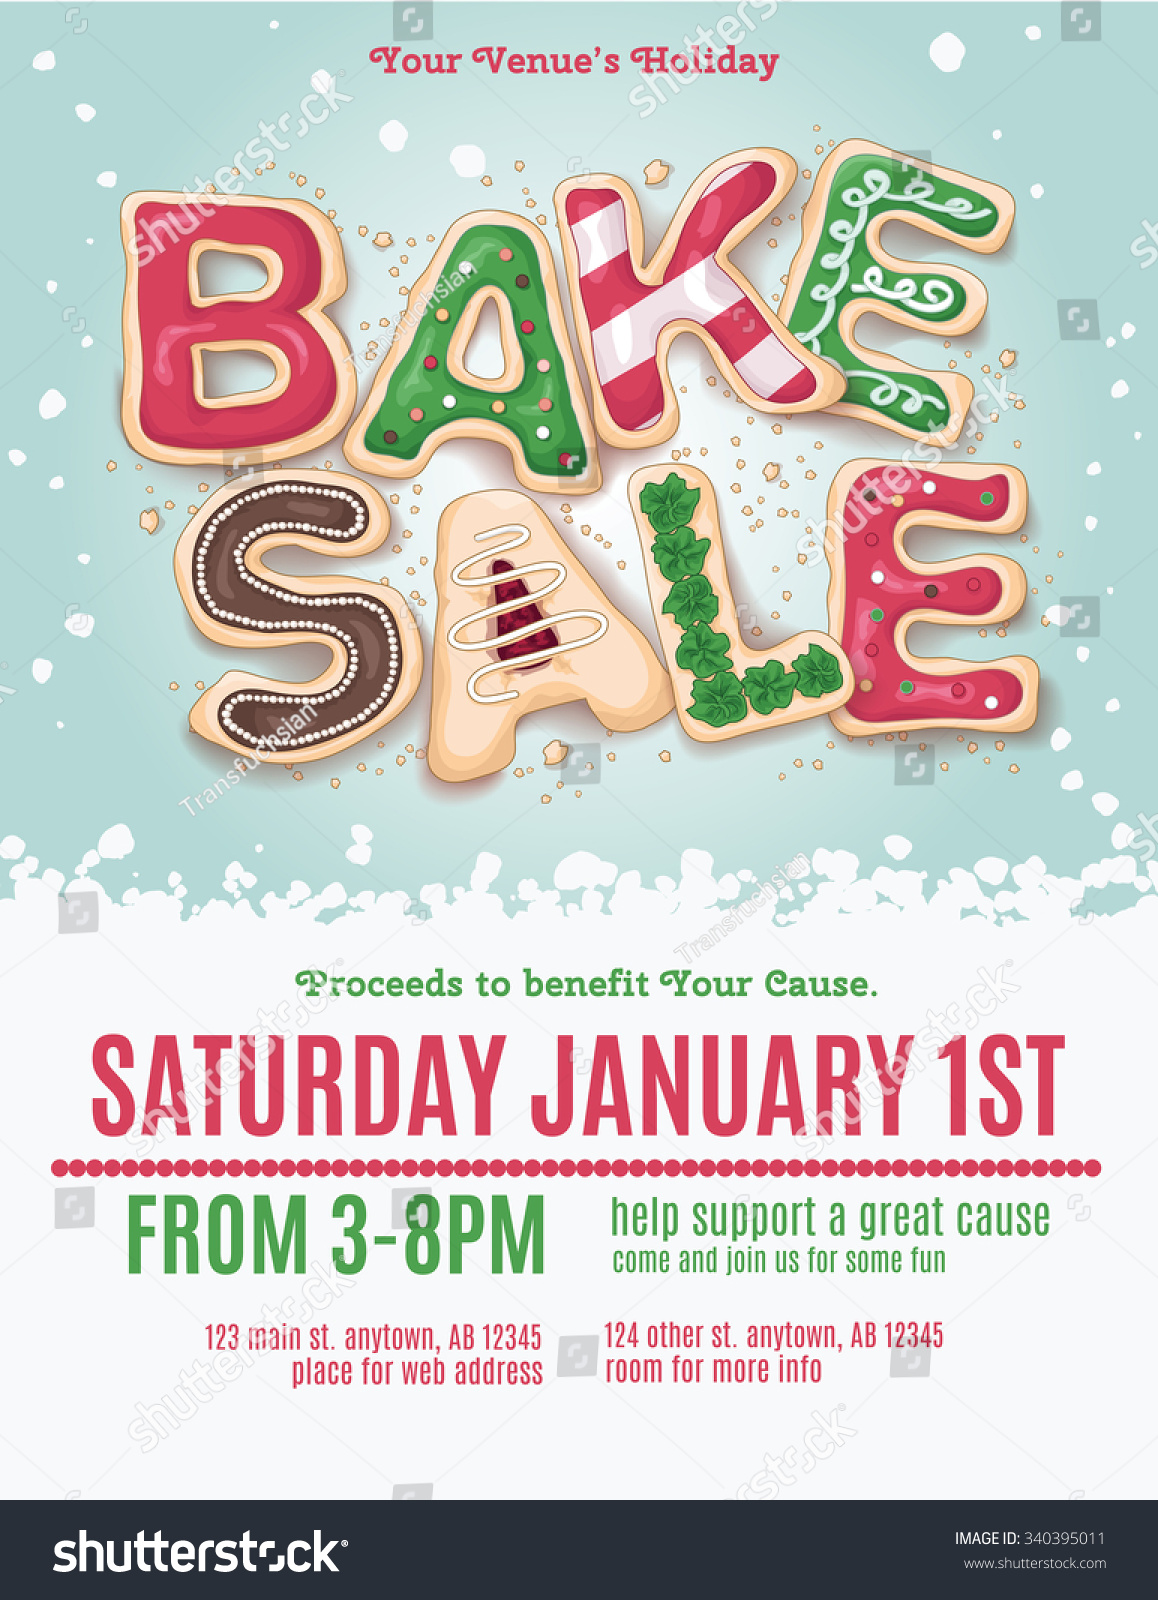 Christmas Holiday Bake Sale Flyer Template Stock Vector (Royalty In Bake Sale Flyer Free Template